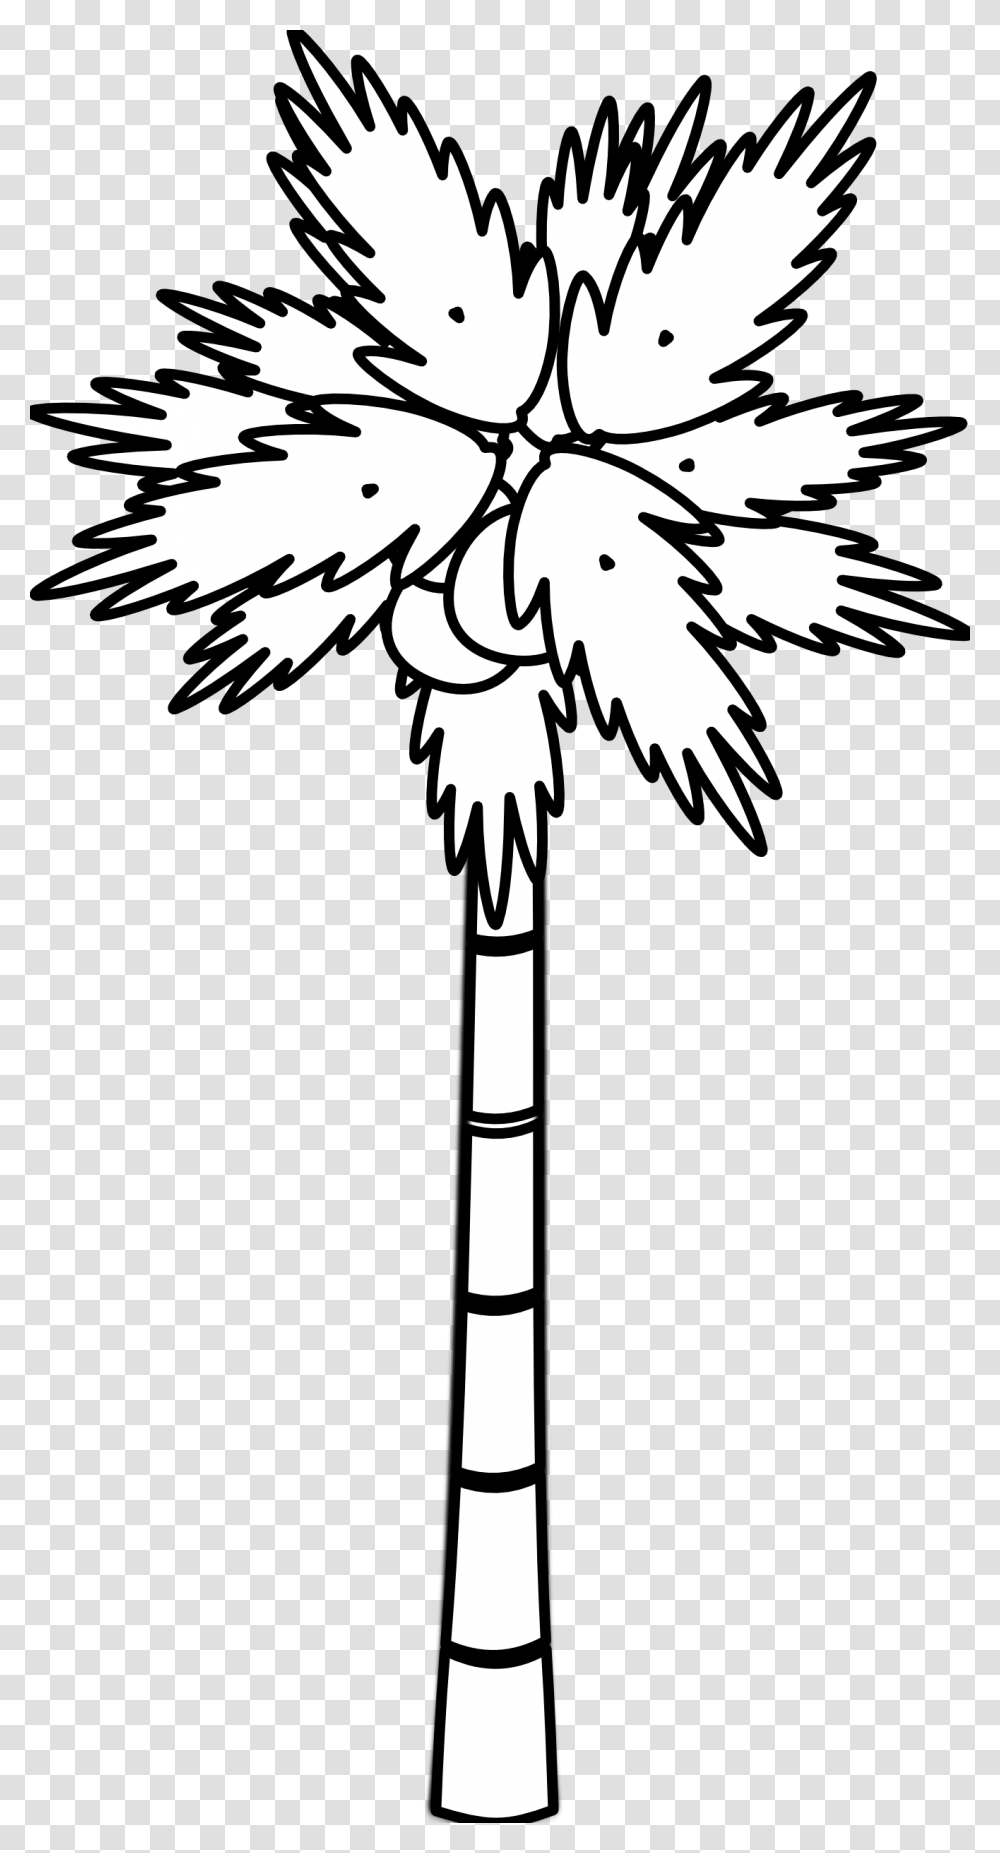 Jungle Trees Clipart 23 555 X 1059 Webcomicmsnet Coconut Tree Clipart Black And White, Symbol, Emblem, Weapon, Weaponry Transparent Png